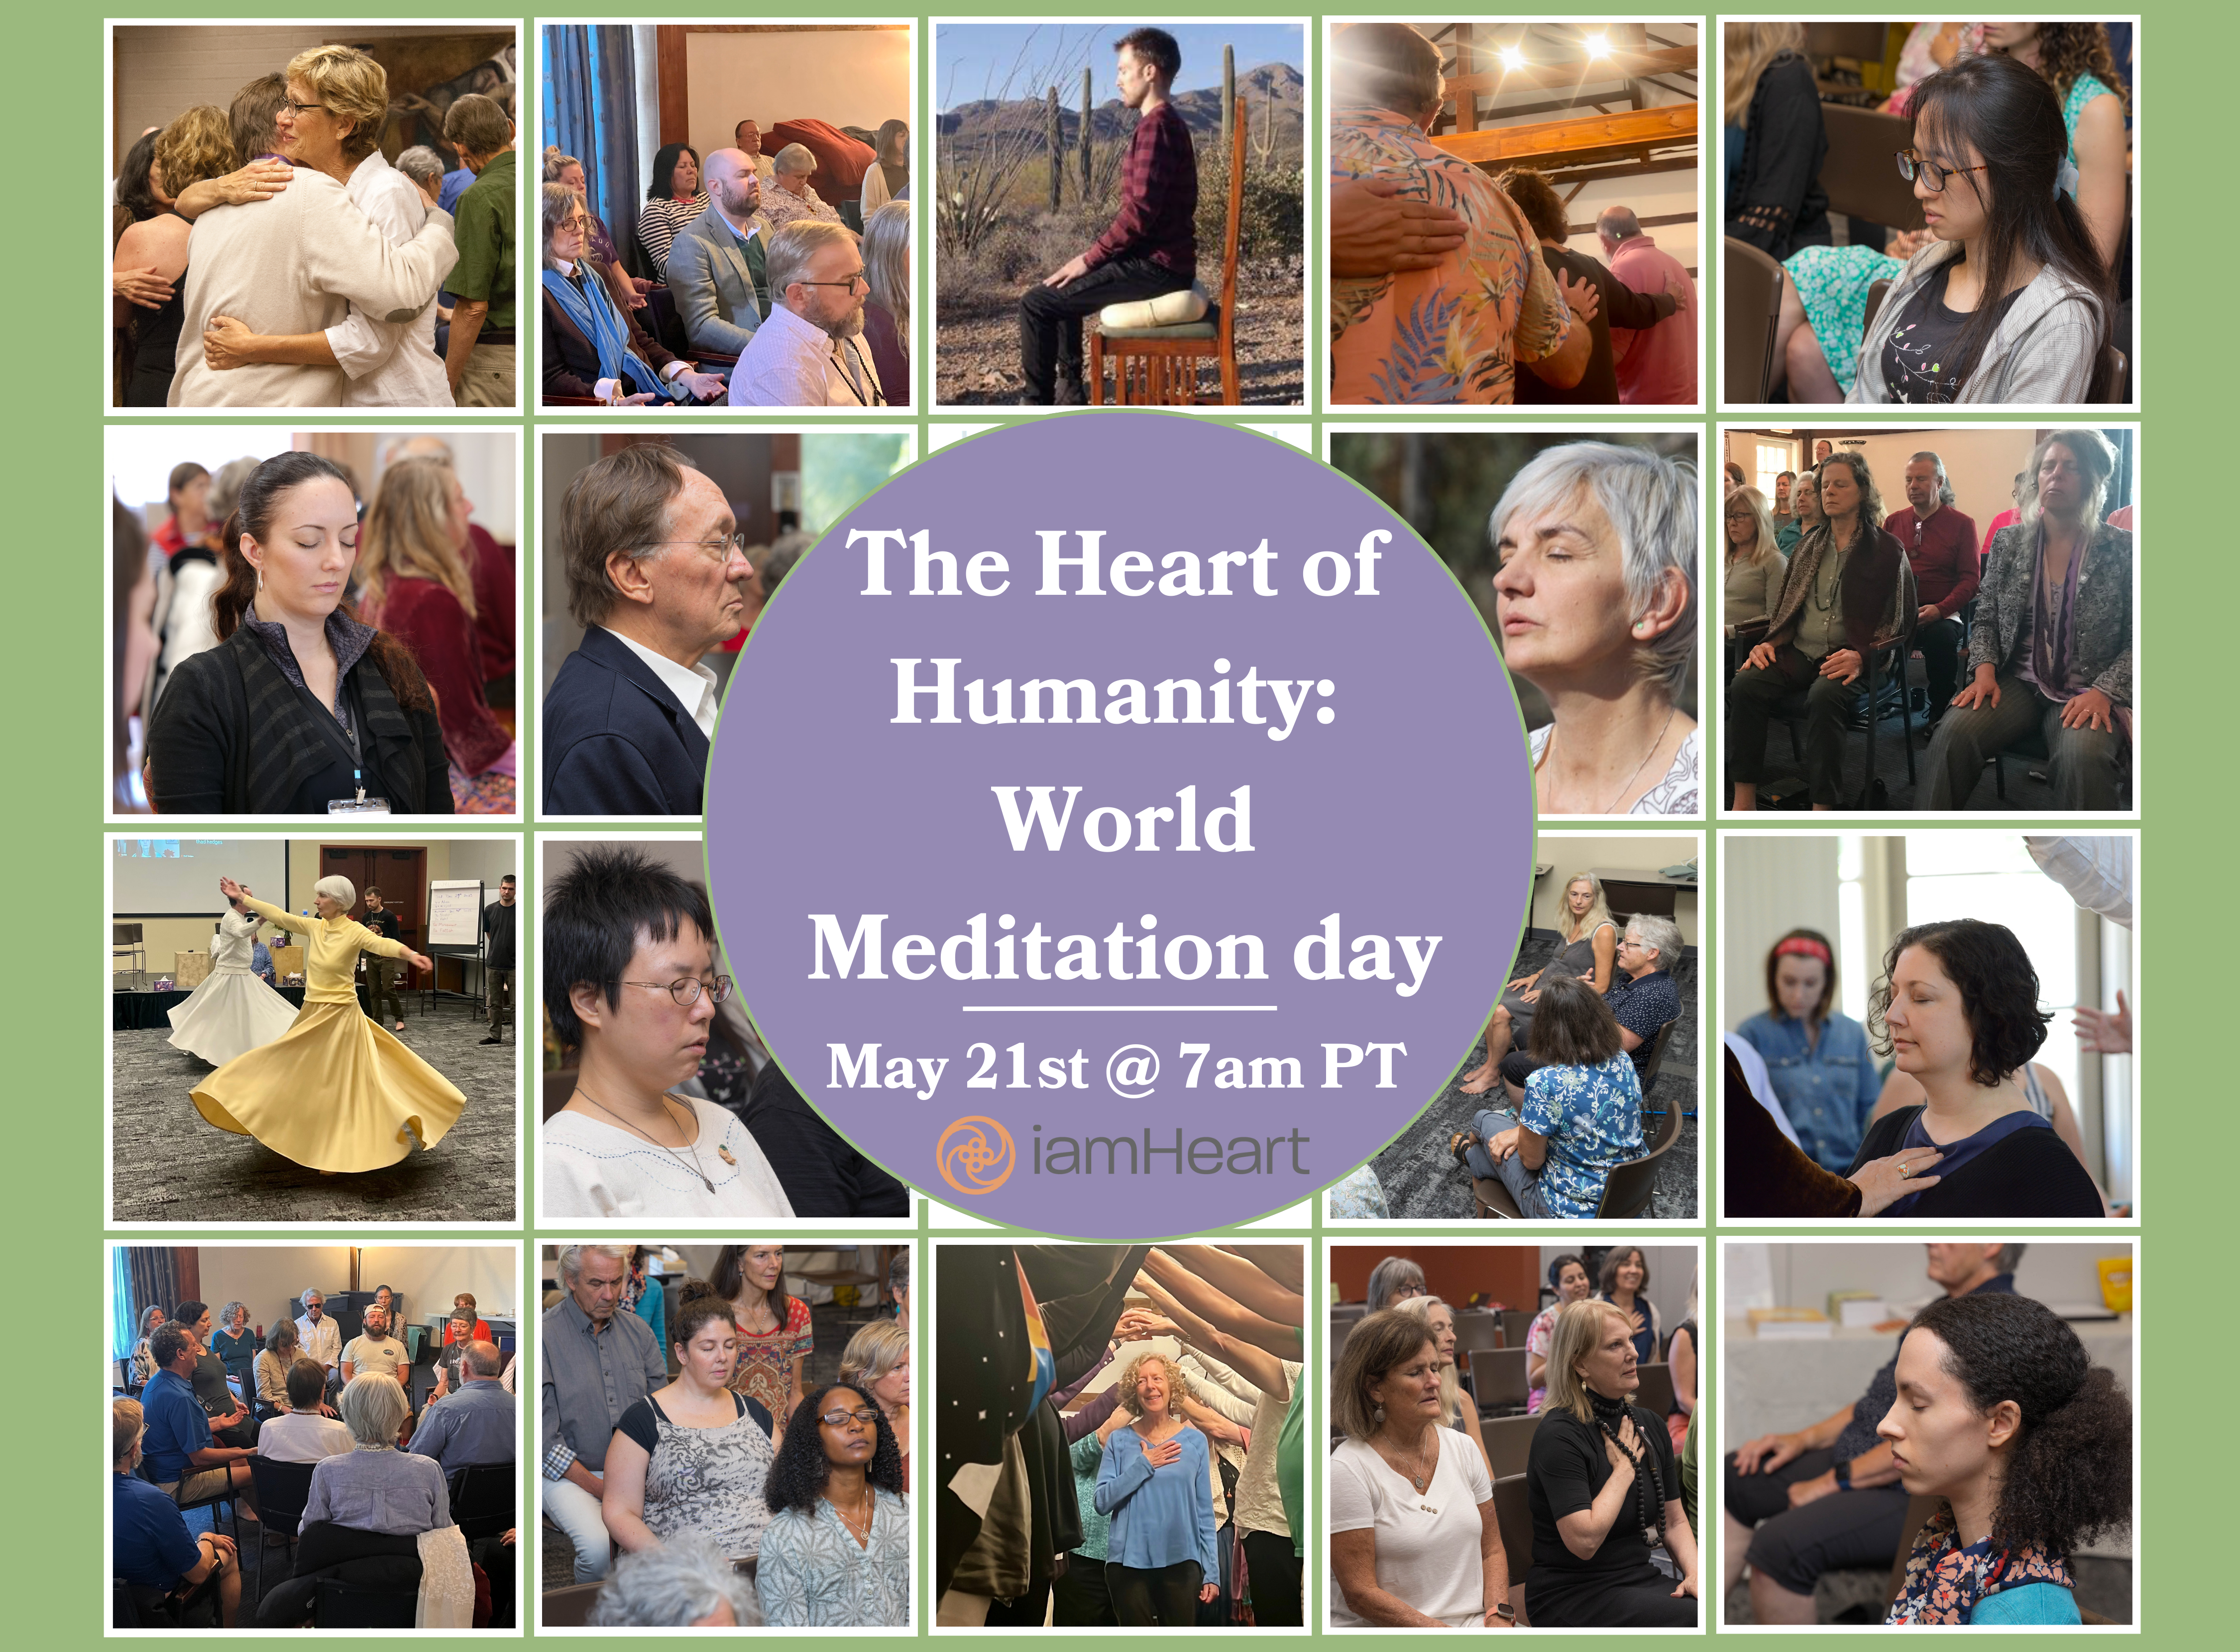 The Heart of Humanity: World Meditation Day